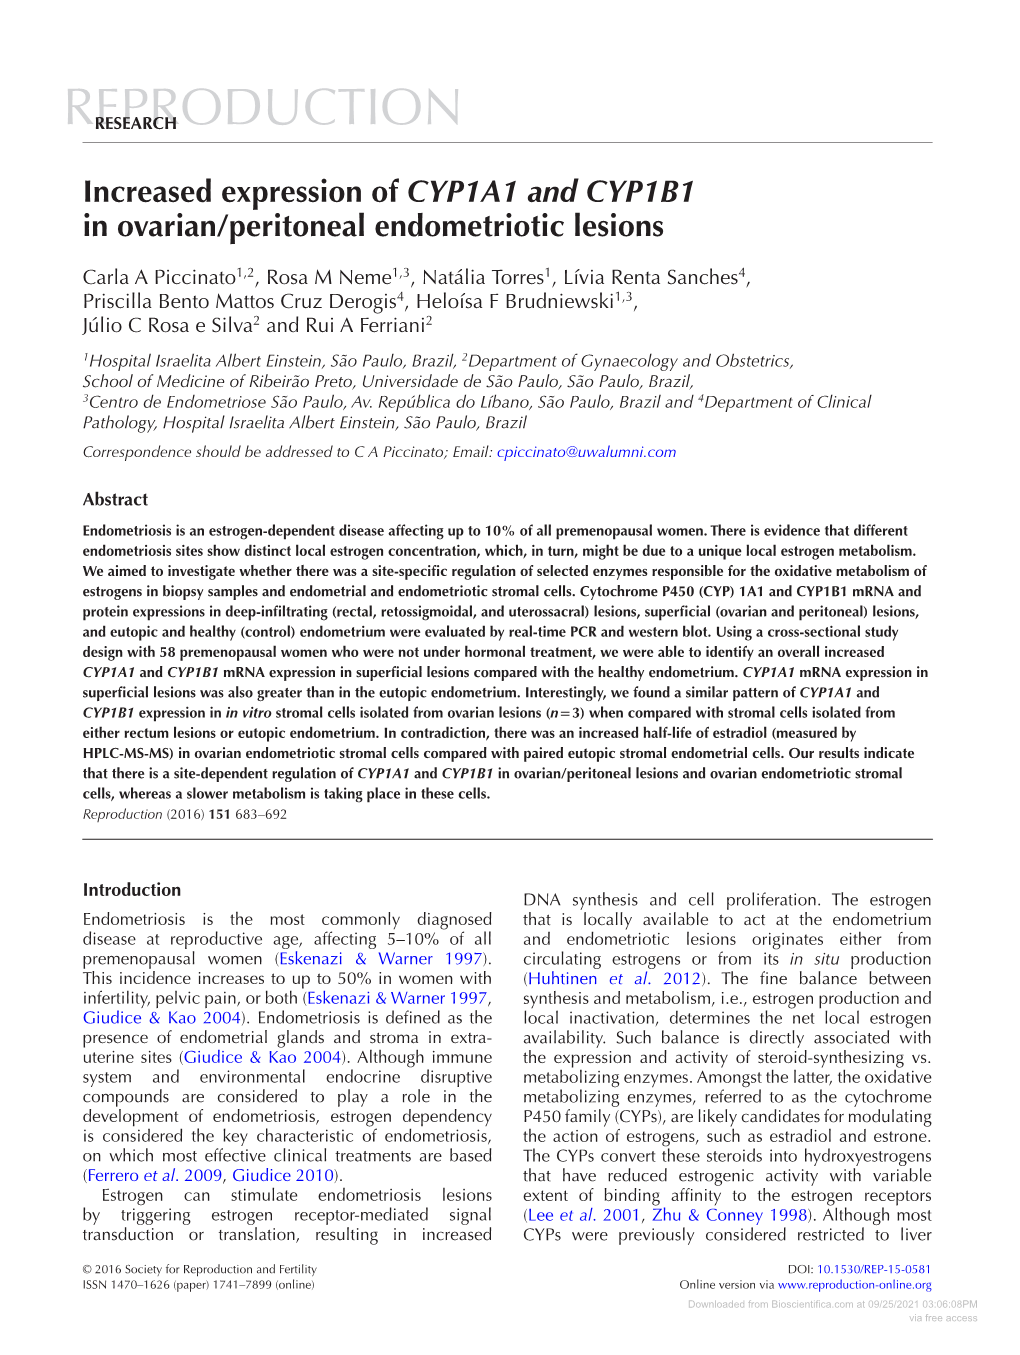 Increased Expression of CYP1A1 and CYP1B1 in Ovarian/Peritoneal Endometriotic Lesions